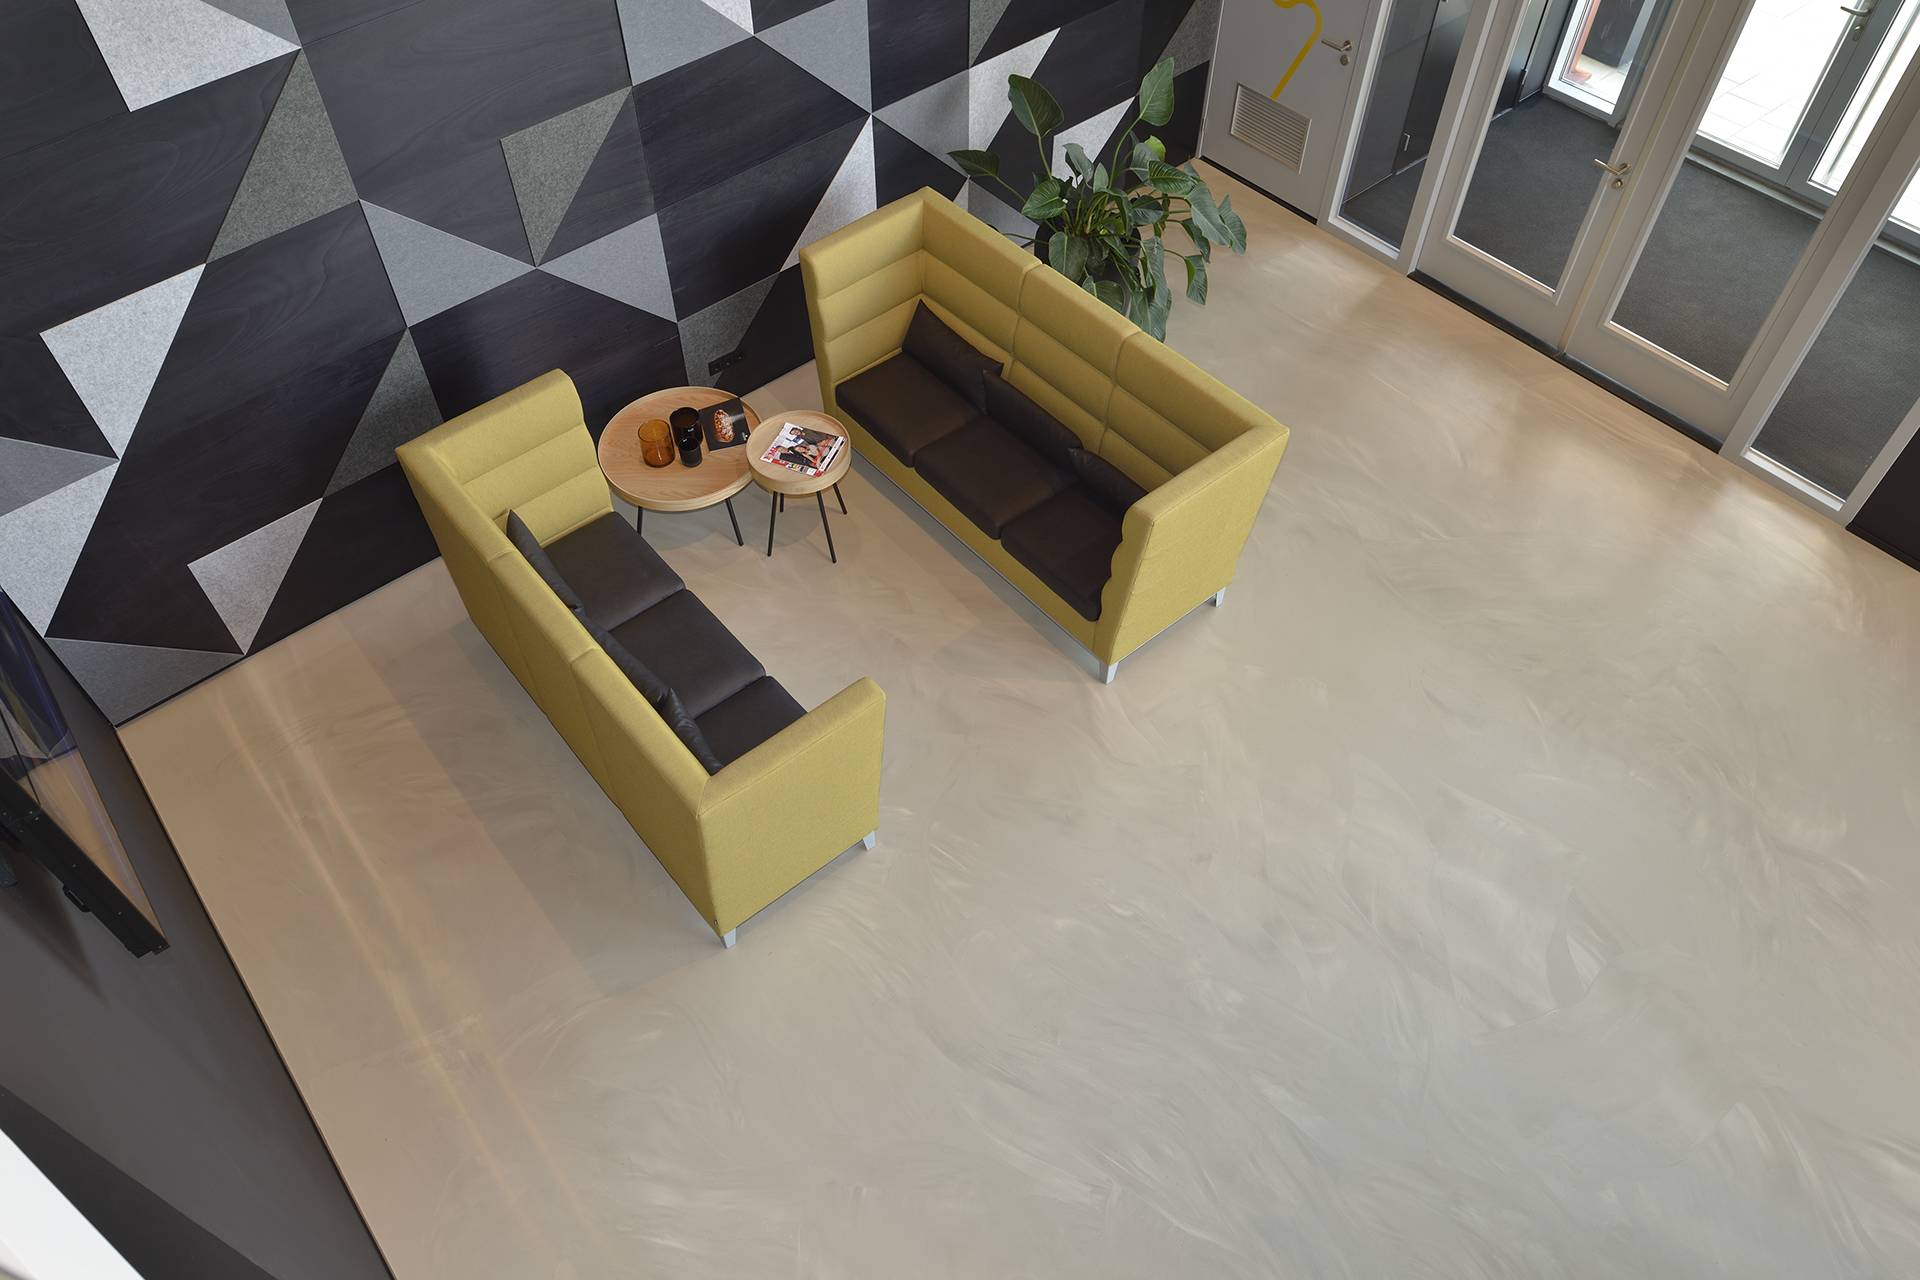 BOLIDTOP FIFTYFIFTY - Resin Flooring System (Bespoke blend, concrete effect) - Resin flooring system